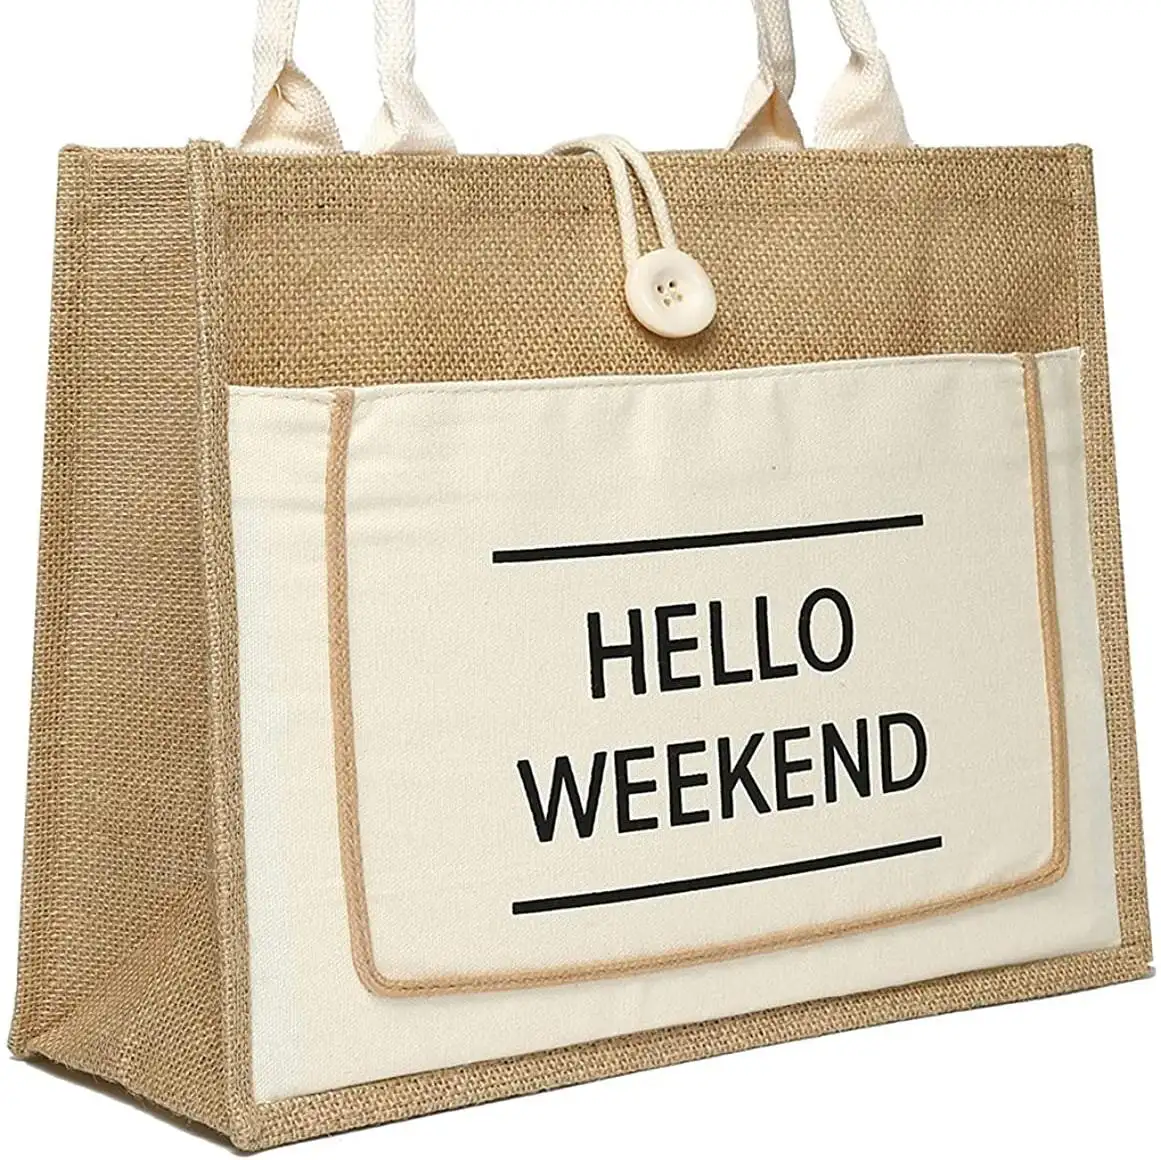 Wholesale promotional colorful design burlap jute tote bags with pockets reusable and eco-friendly